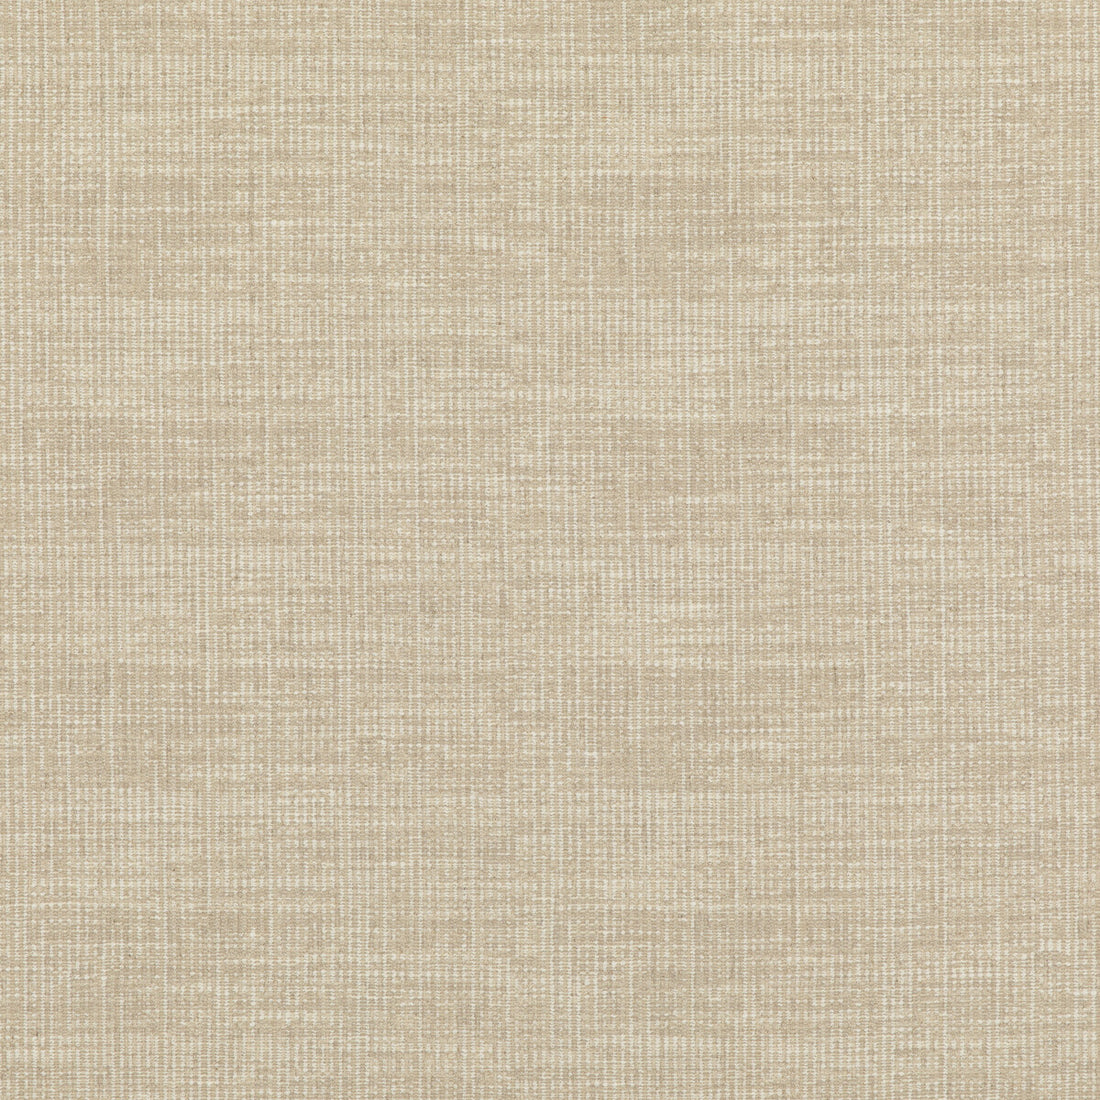 Umbra fabric in ivory color - pattern ED85327.104.0 - by Threads in the Luxury Weaves II collection